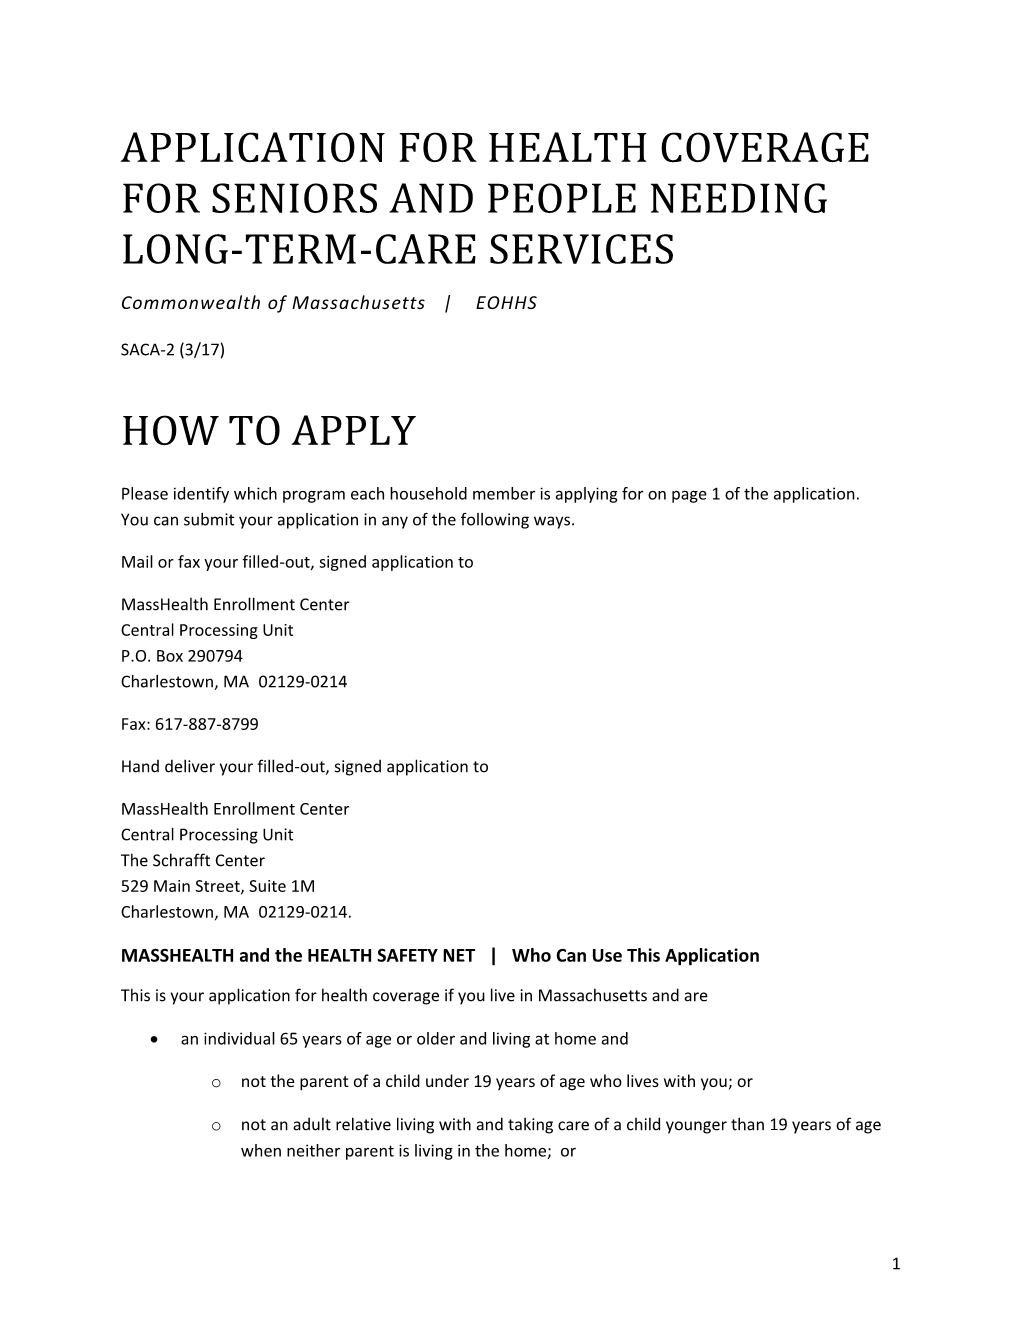 Application for Health Coverage for Seniors and People Needing Long-Term-Care Services